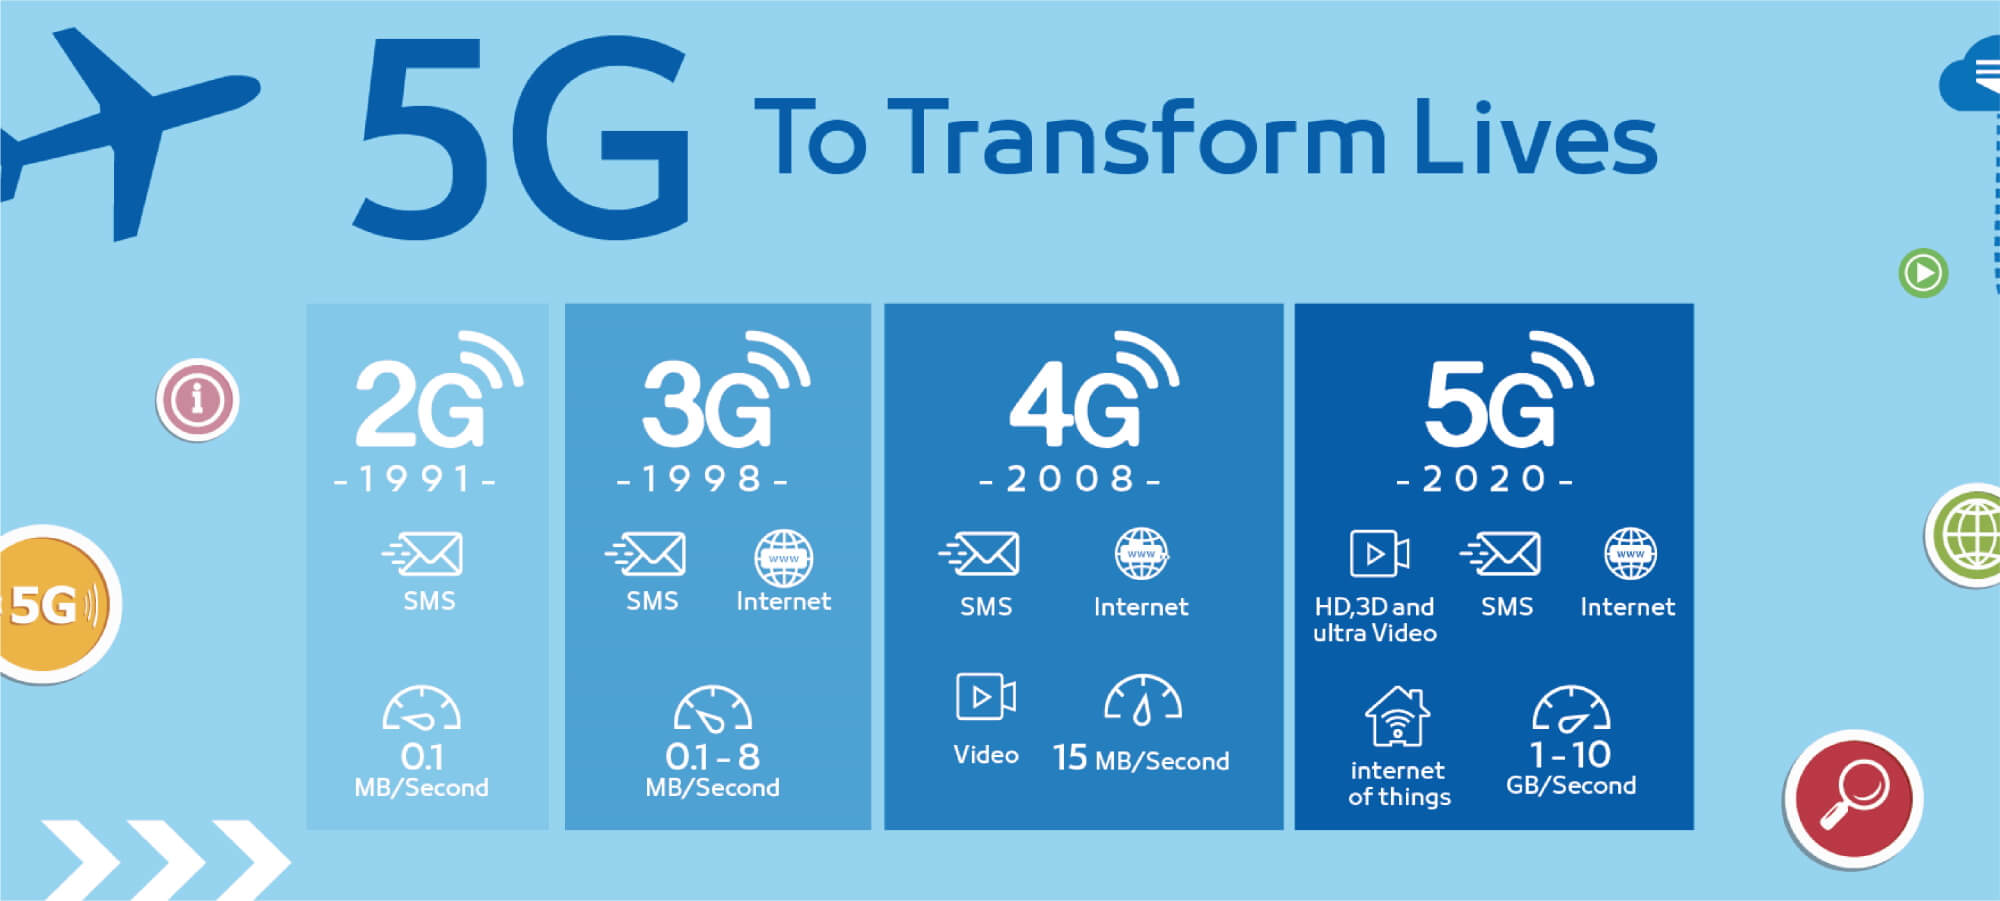 "What You Need to Know About 5G in 2020 - Image 4"